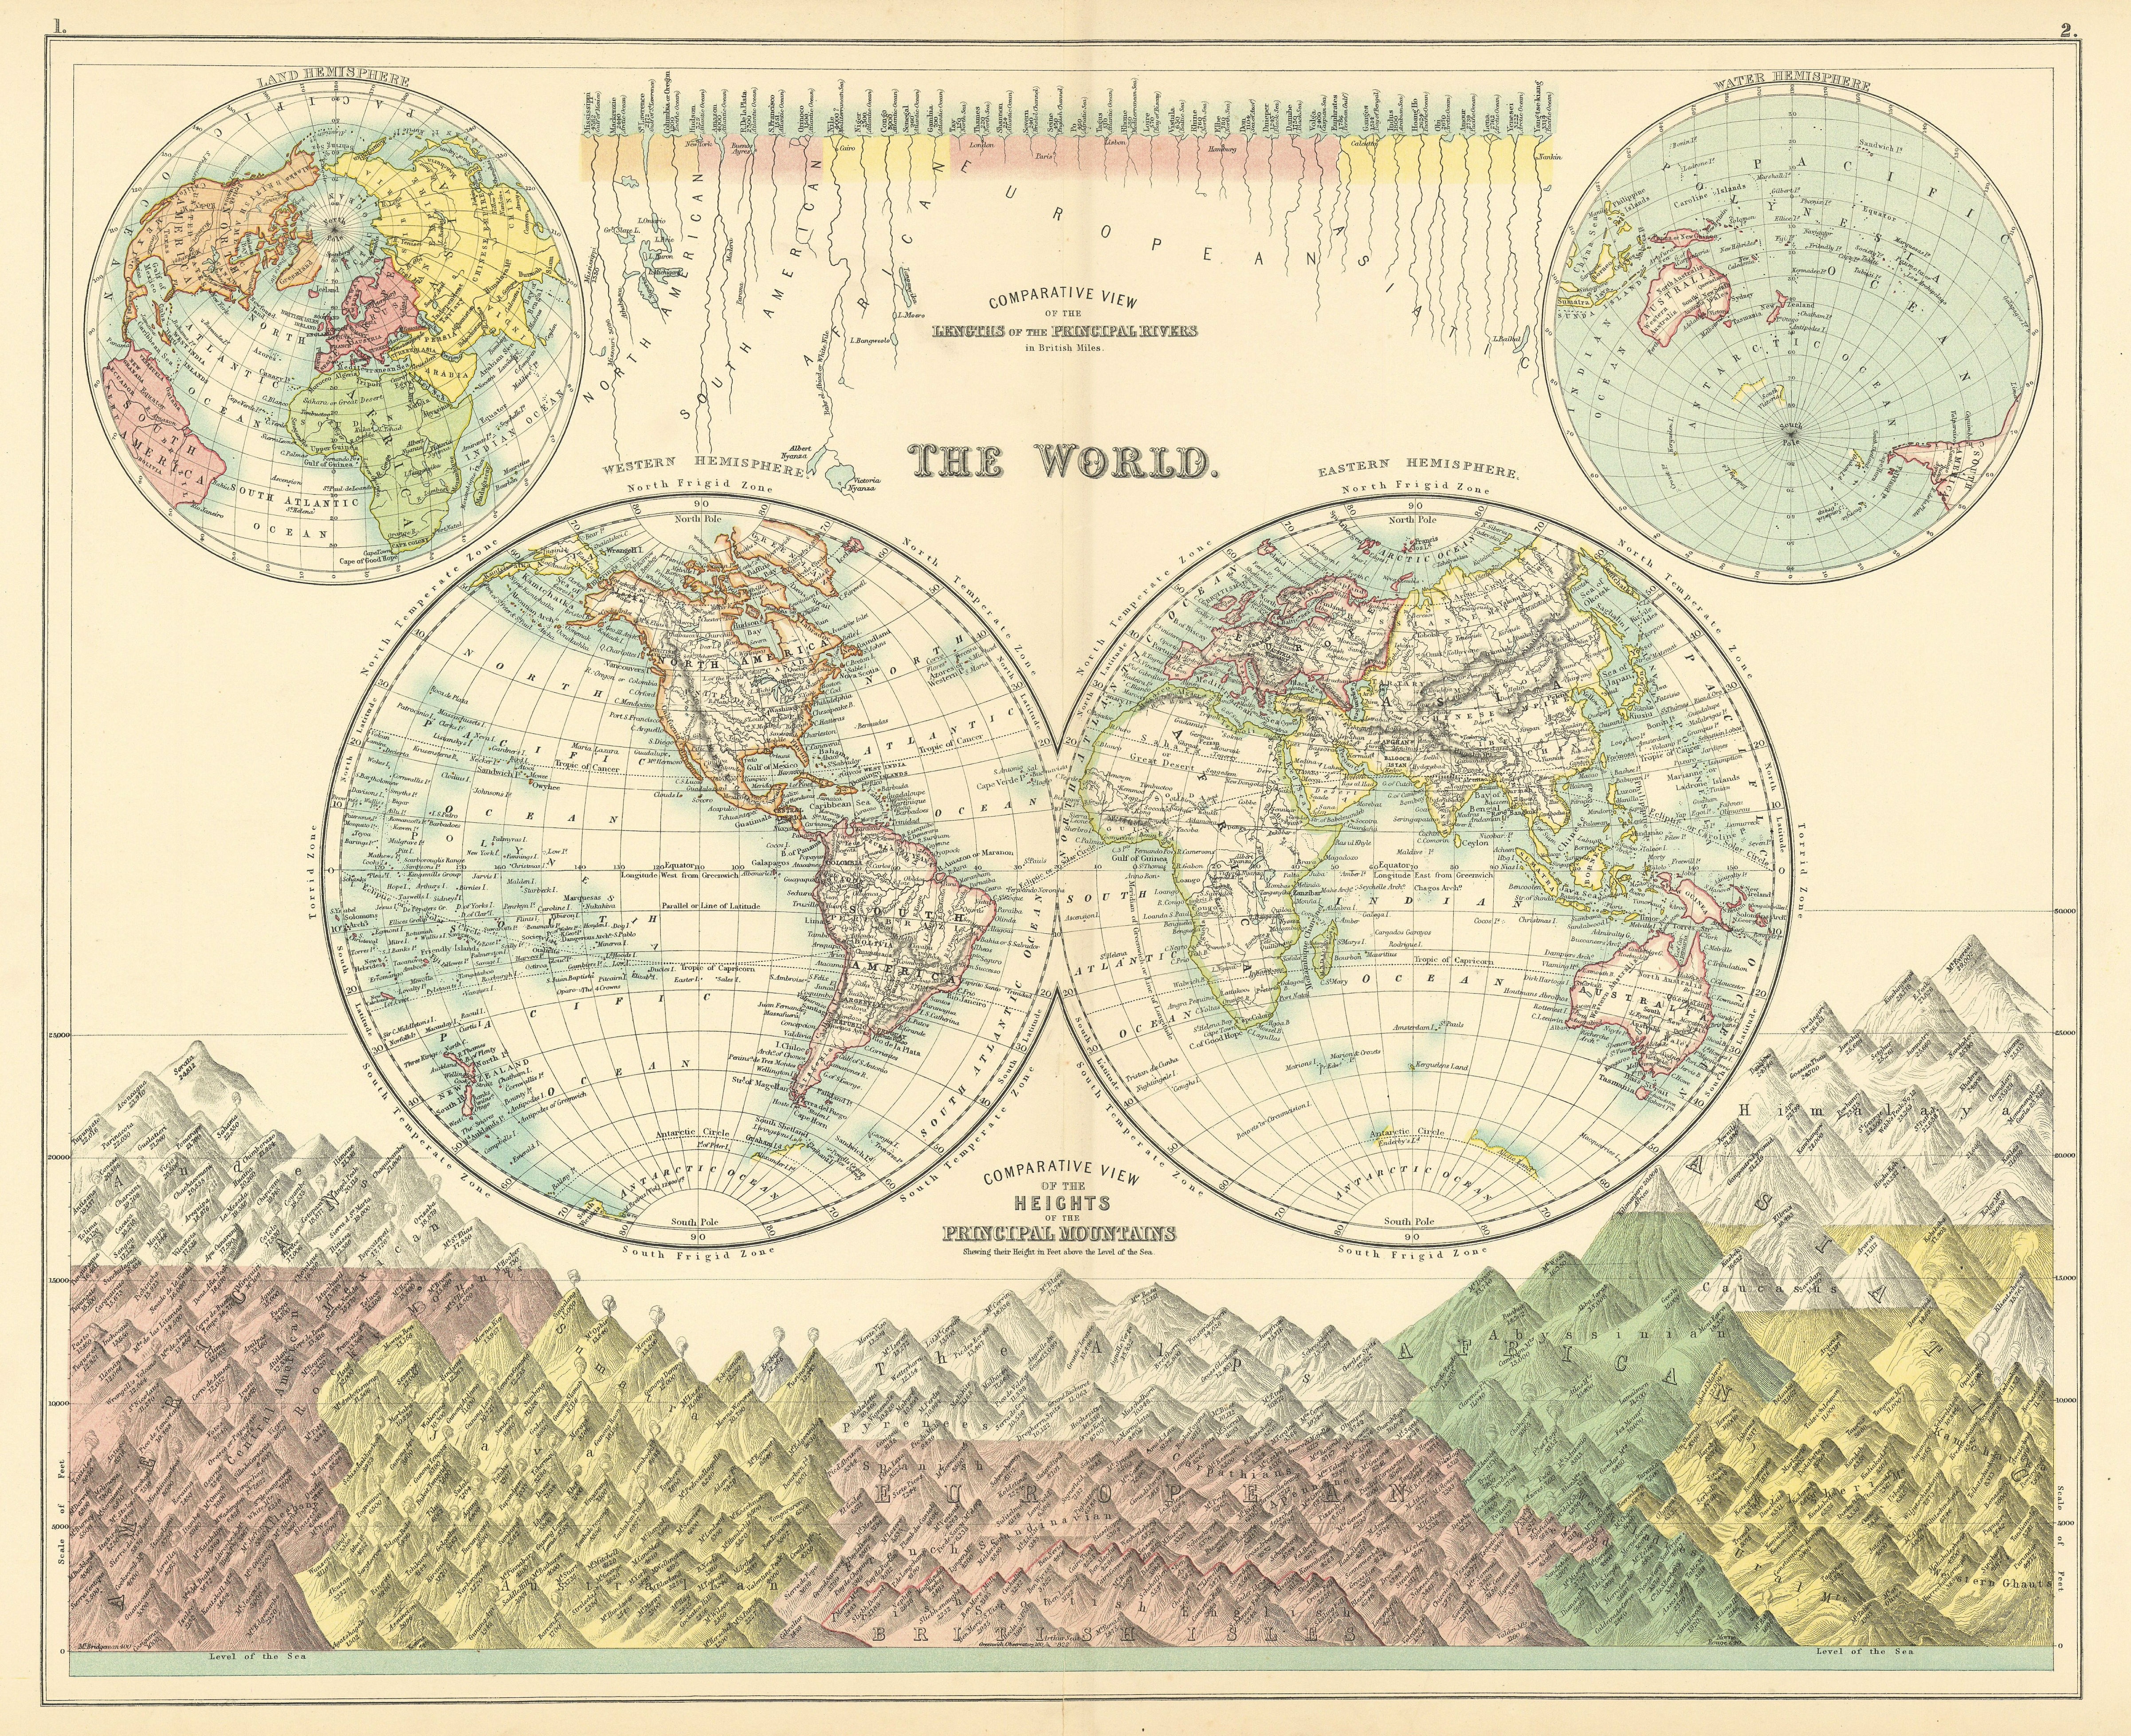 World in twin Hemispheres. Mountains and Rivers. BARTHOLOMEW 1898 old map